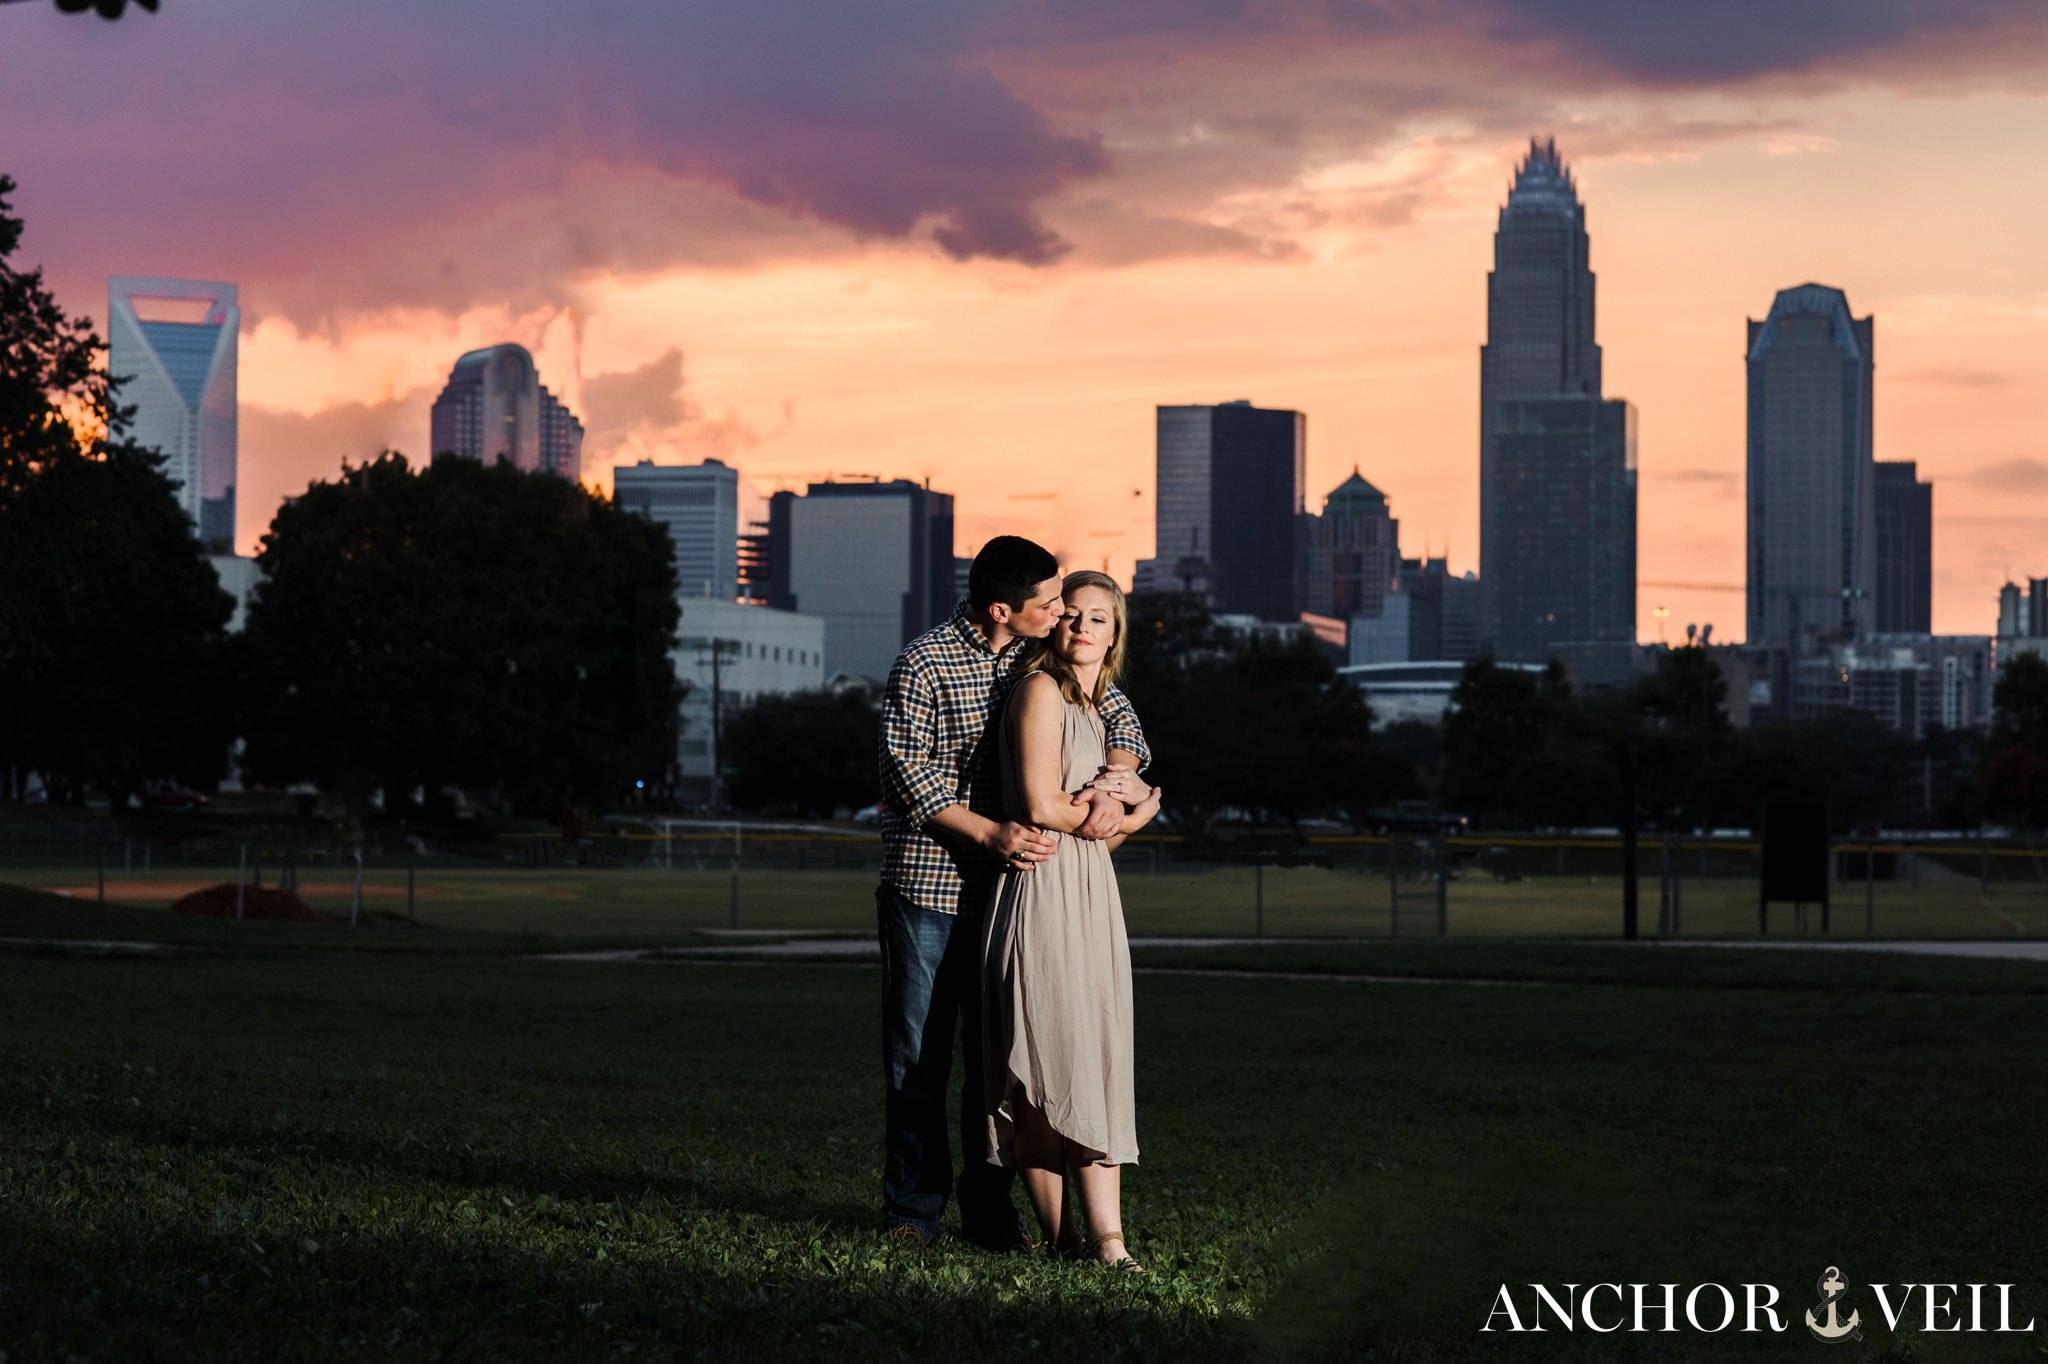 uptown charlotte skyline during the engagement session